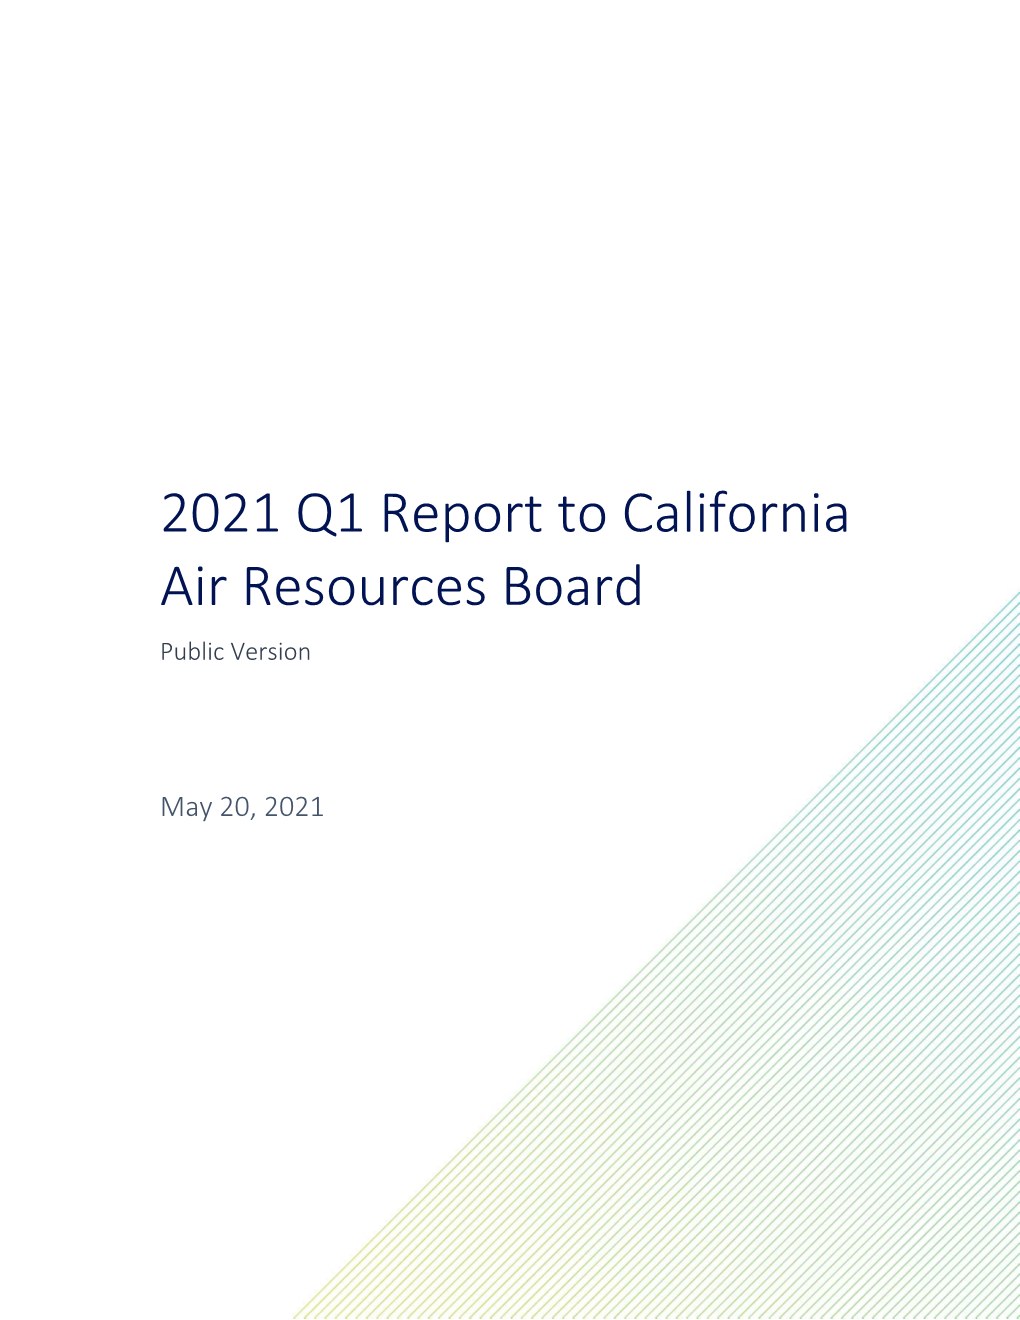 Q1 2021 Report to the California Air Resources Board